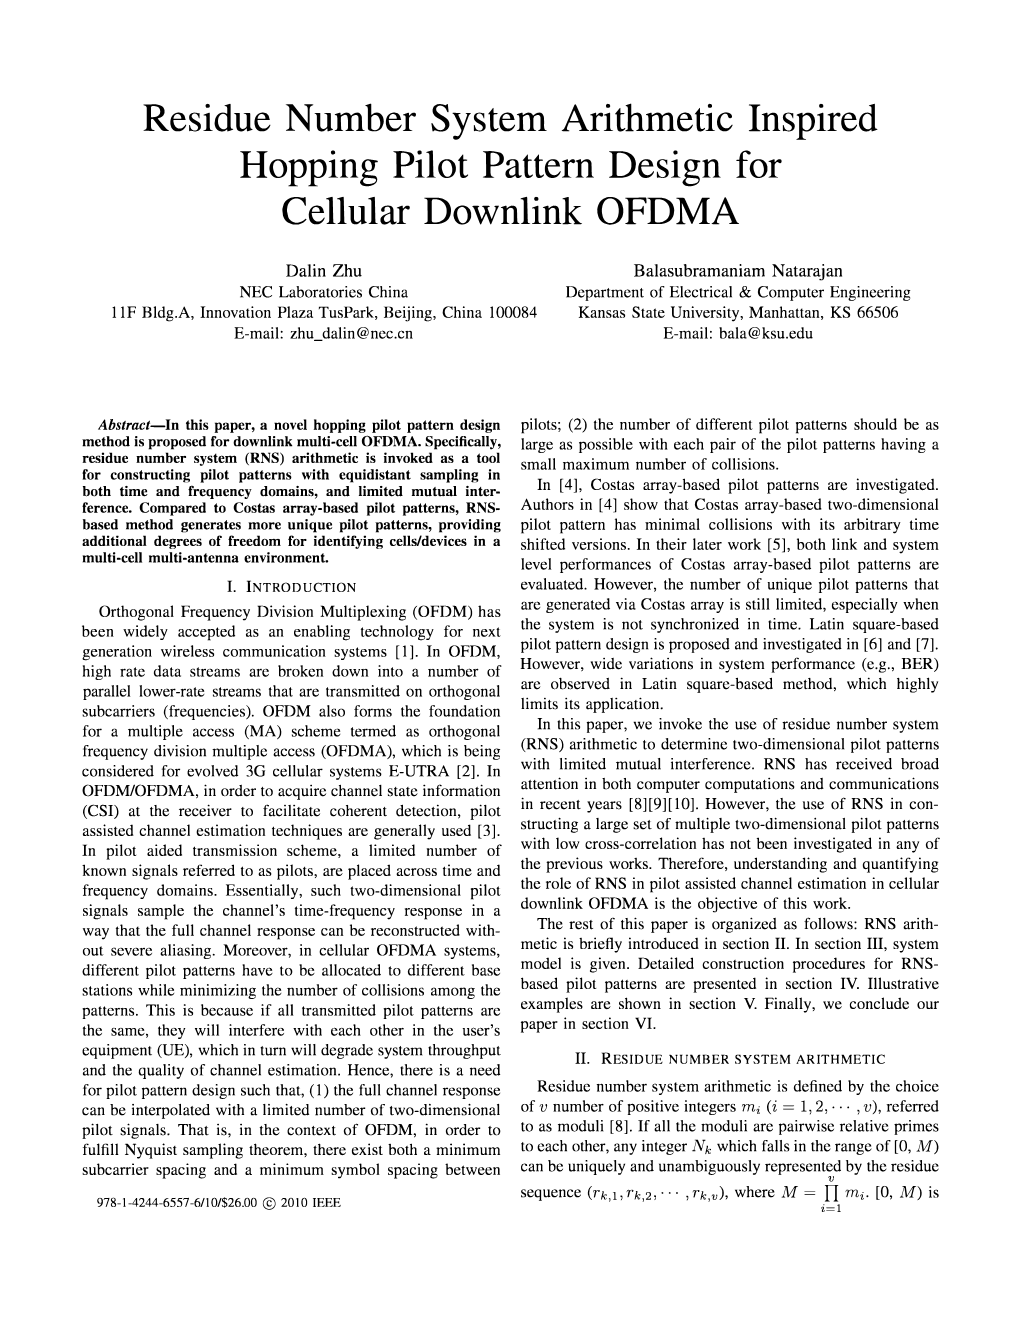 Residue Number System Arithmetic Inspired Hopping Pilot Pattern Design for Cellular Downlink OFDMA